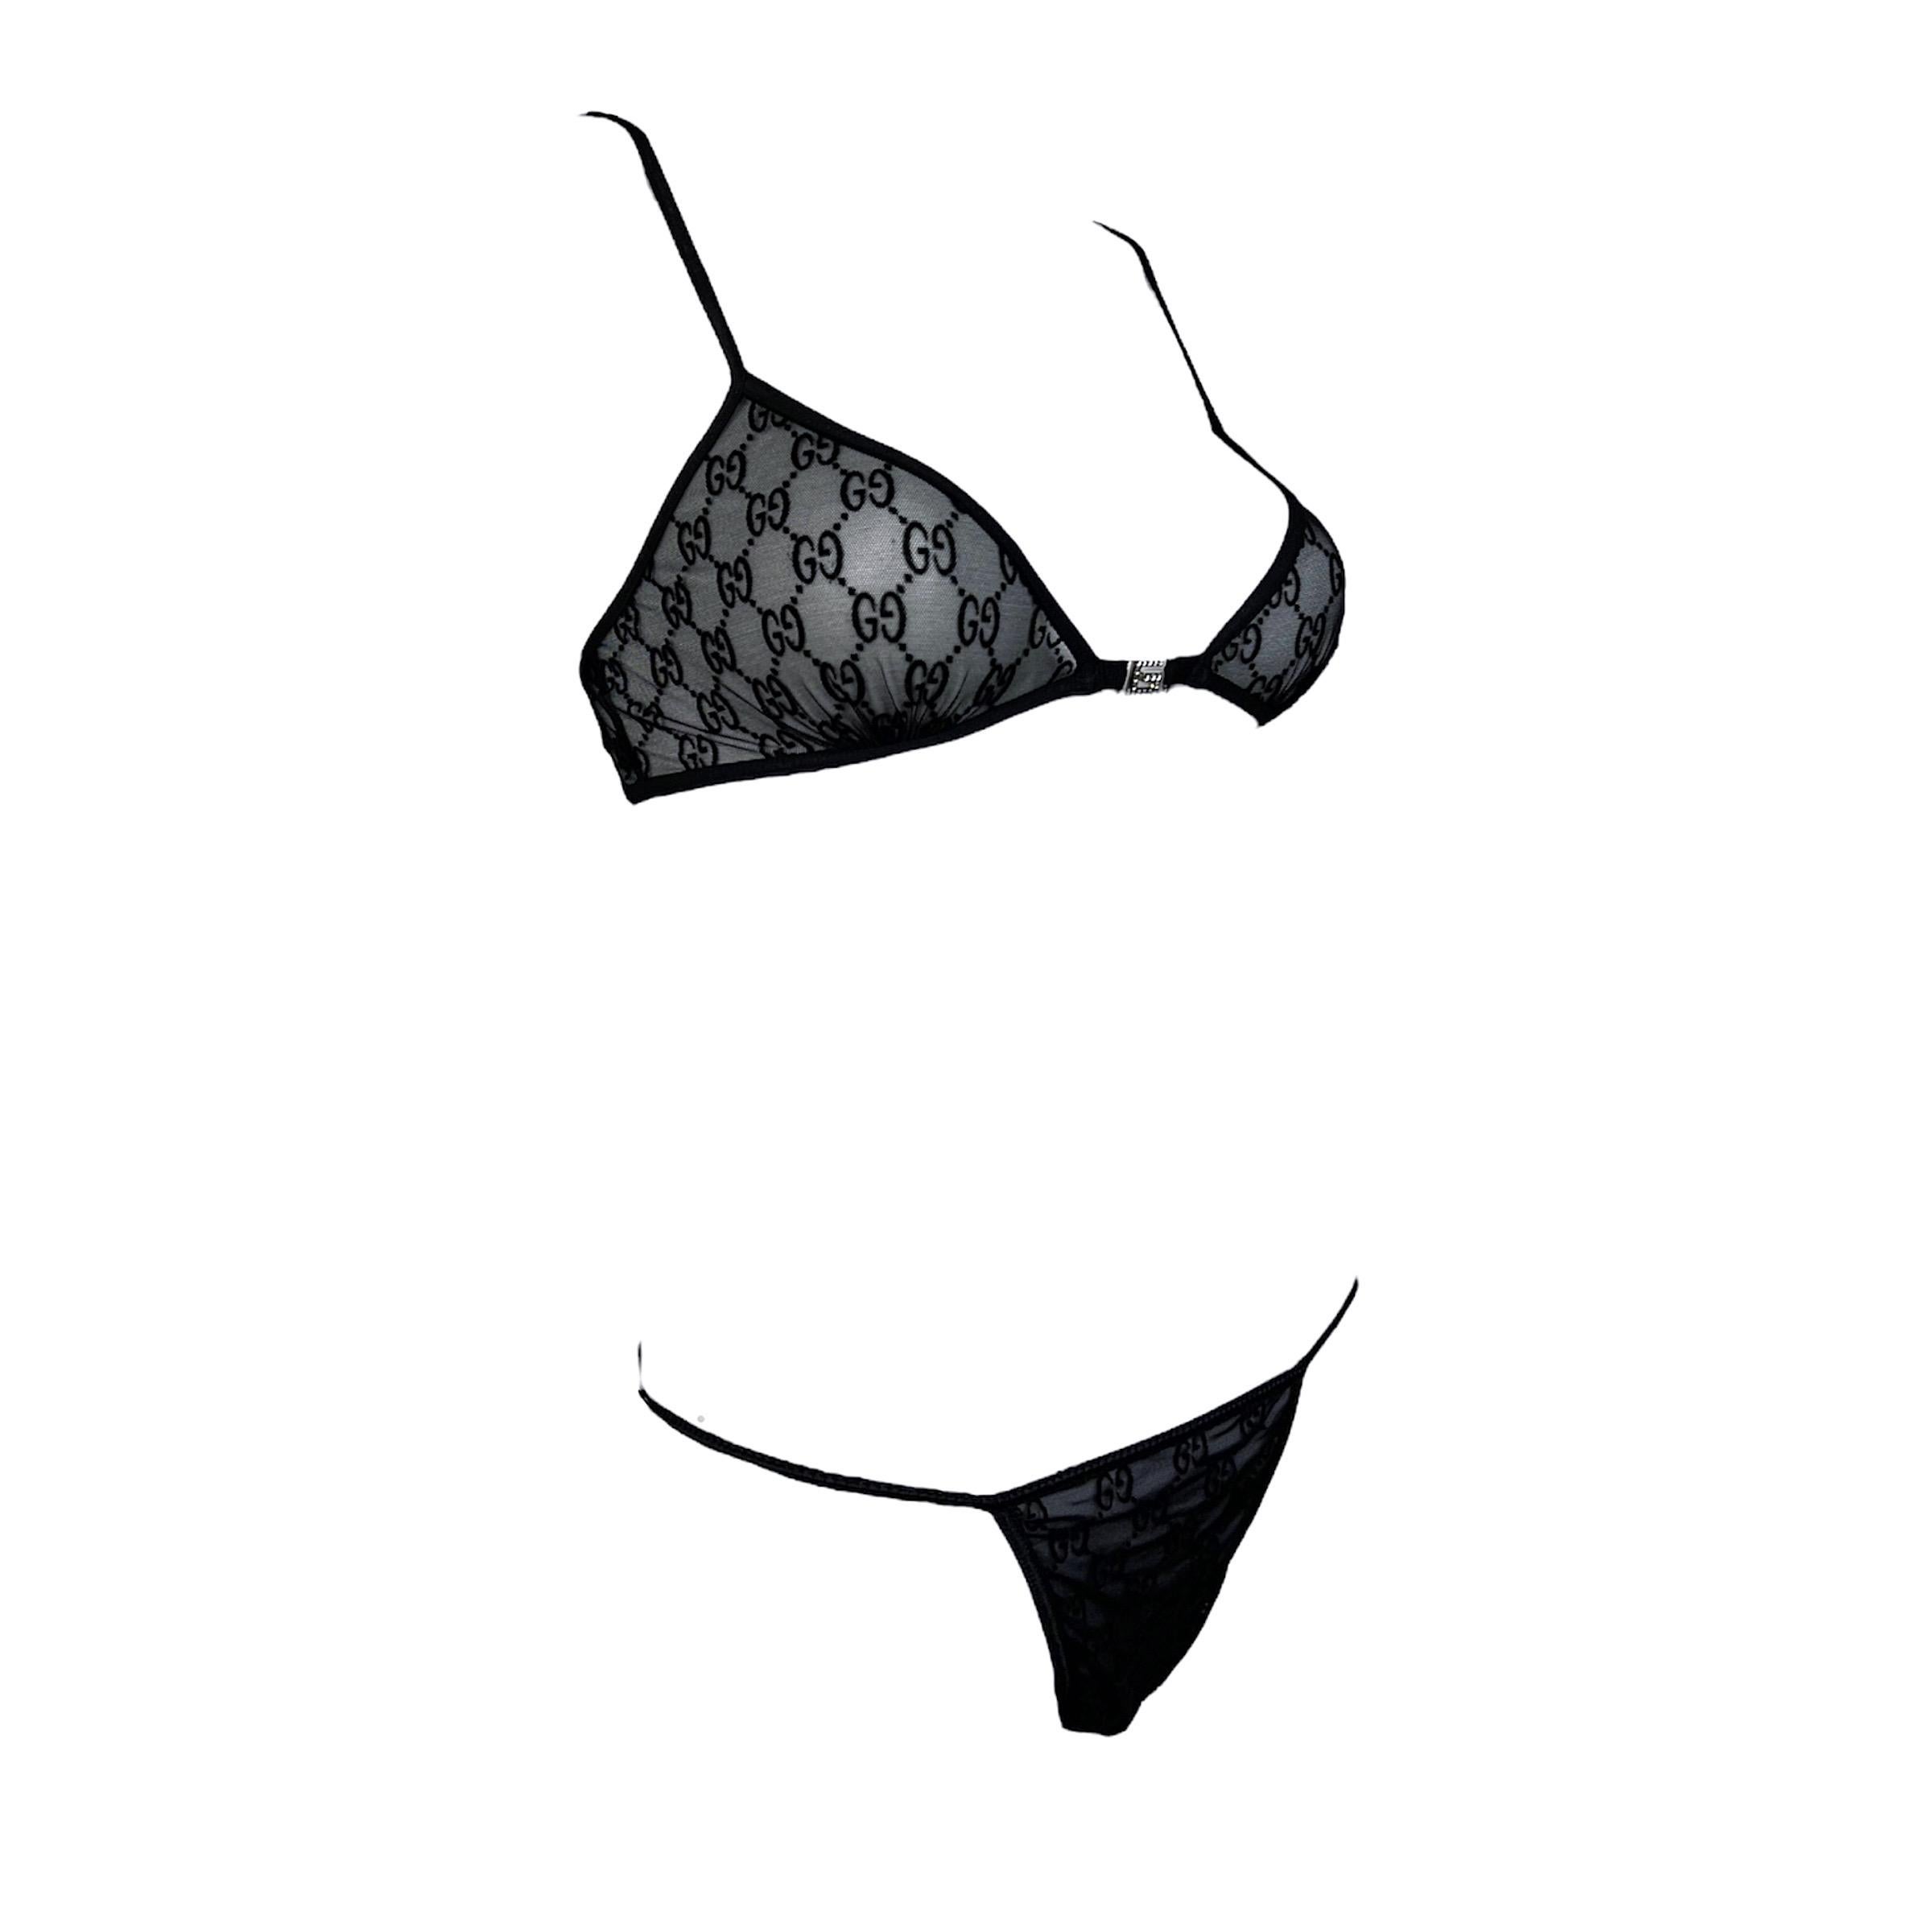 Iconic Gucci by Tom Ford monogram lingerie set from Spring Summer 1998 collection as seen on the runway. This lingerie set is made of delicate black mesh with tone on tone black Gucci monogram and includes a Gucci G logo front clasp hardware covered